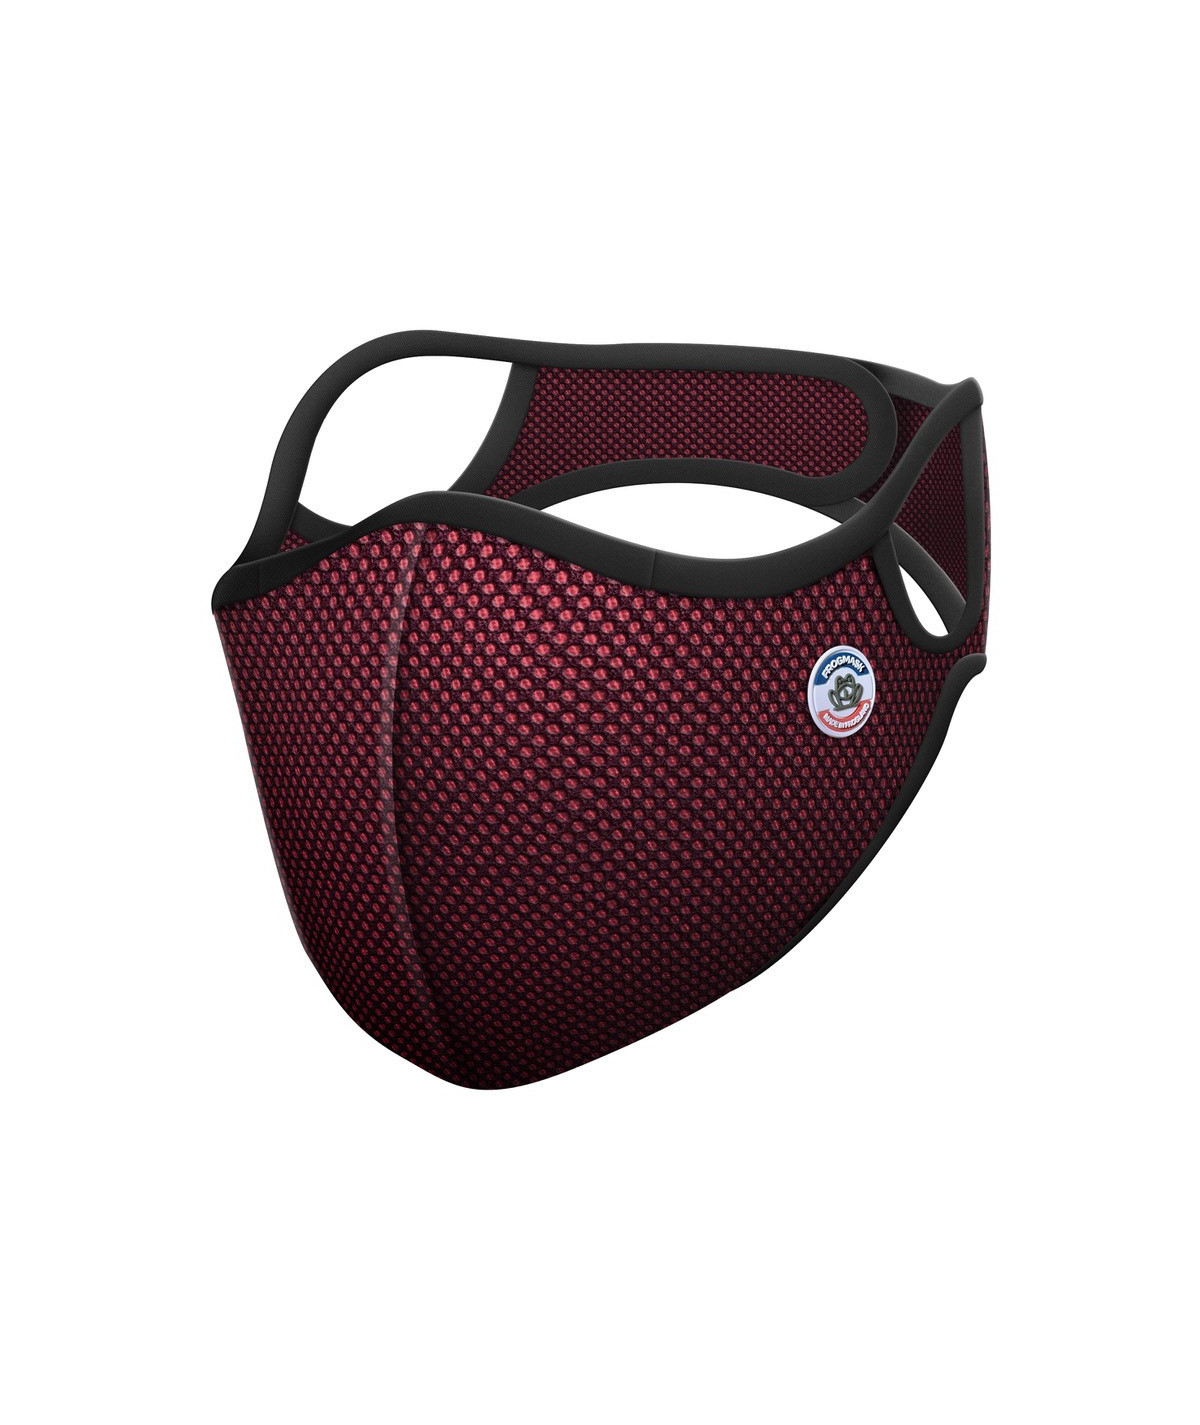 Masque anti-pollution Frogmask Bordeaux